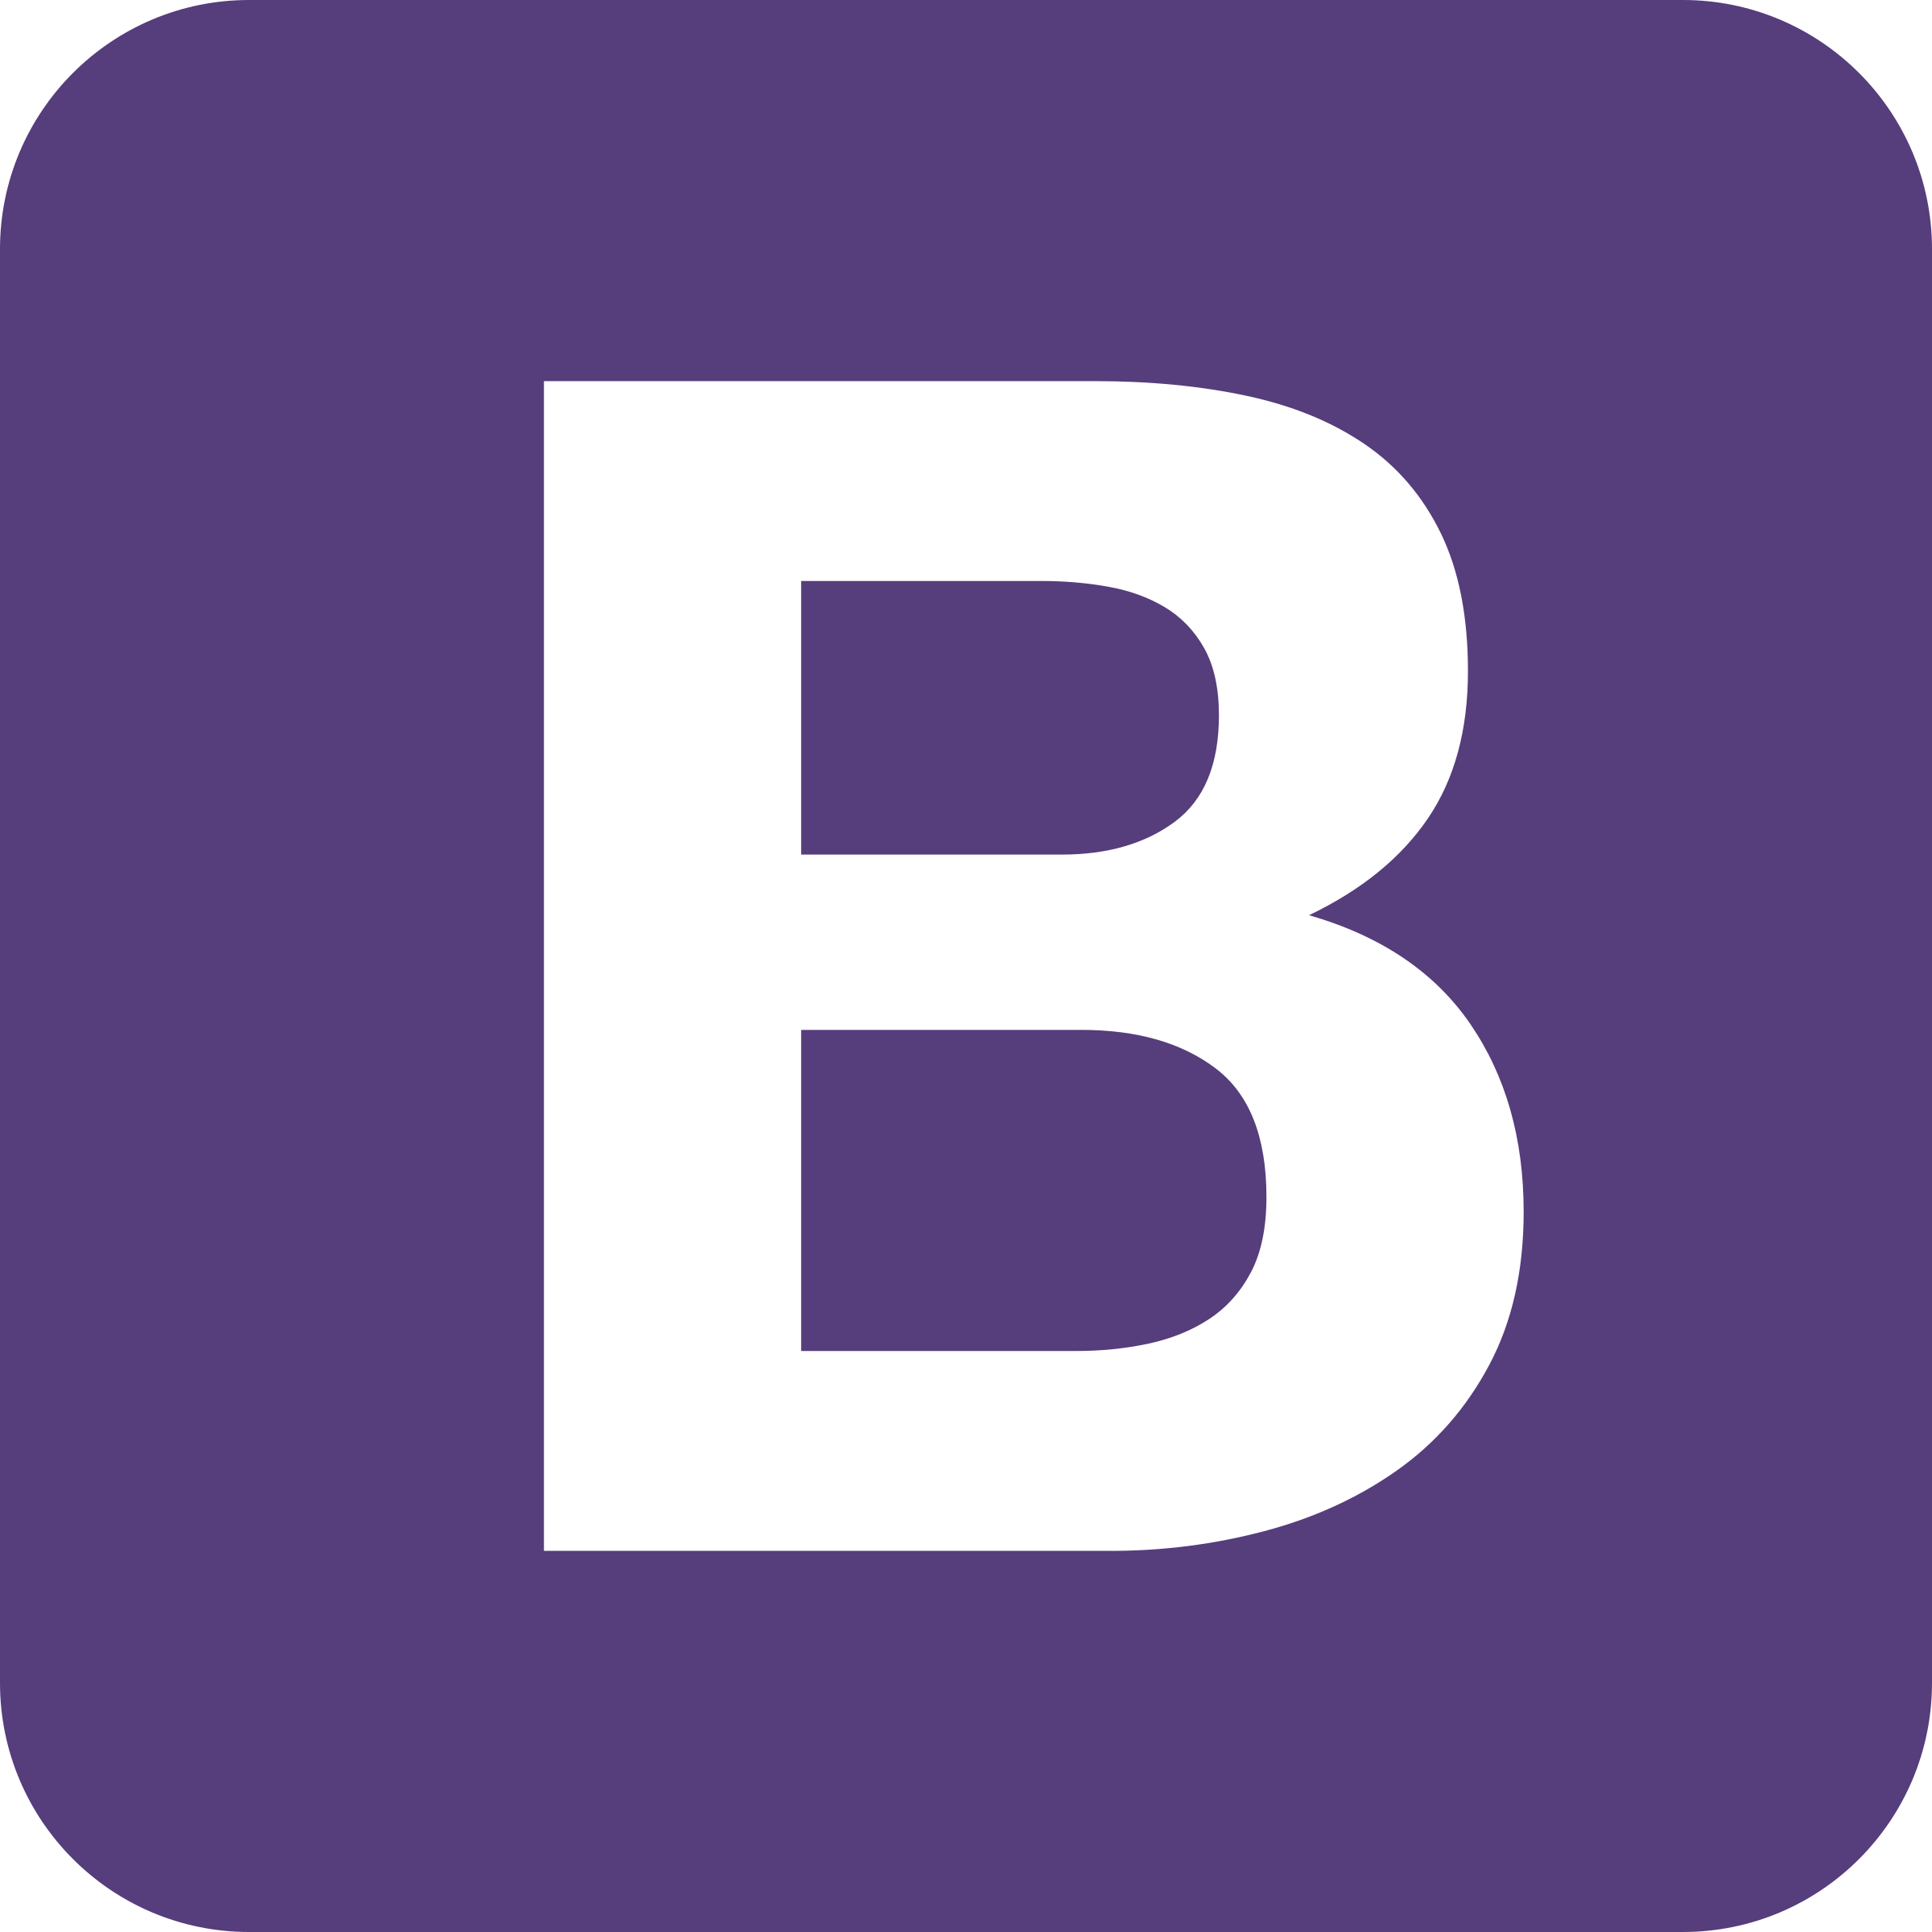 bootstrap4